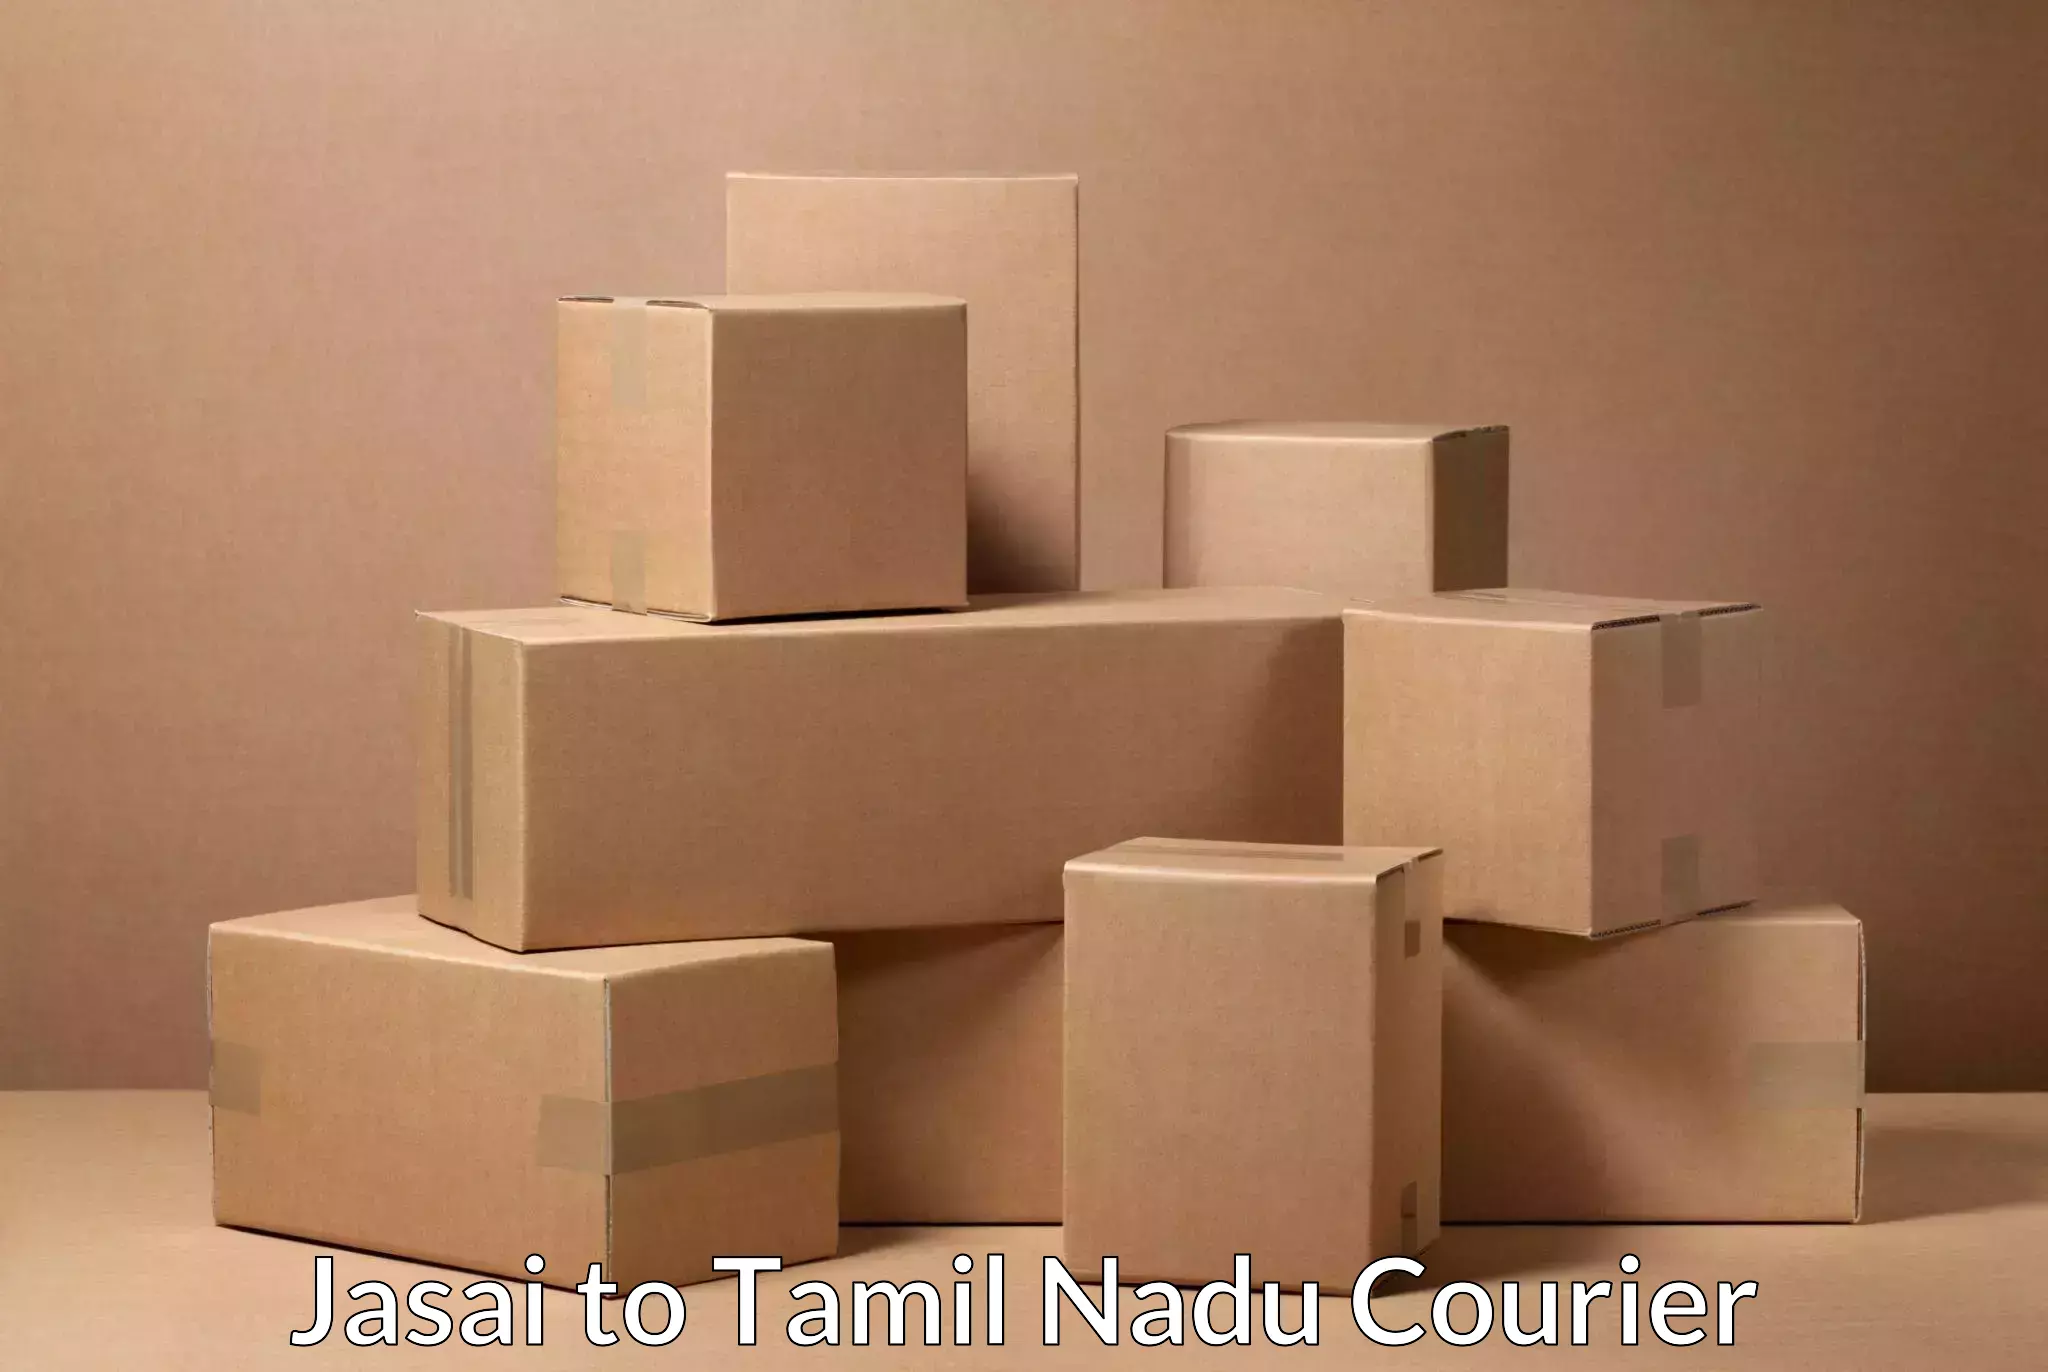 Efficient package consolidation Jasai to Tamil Nadu